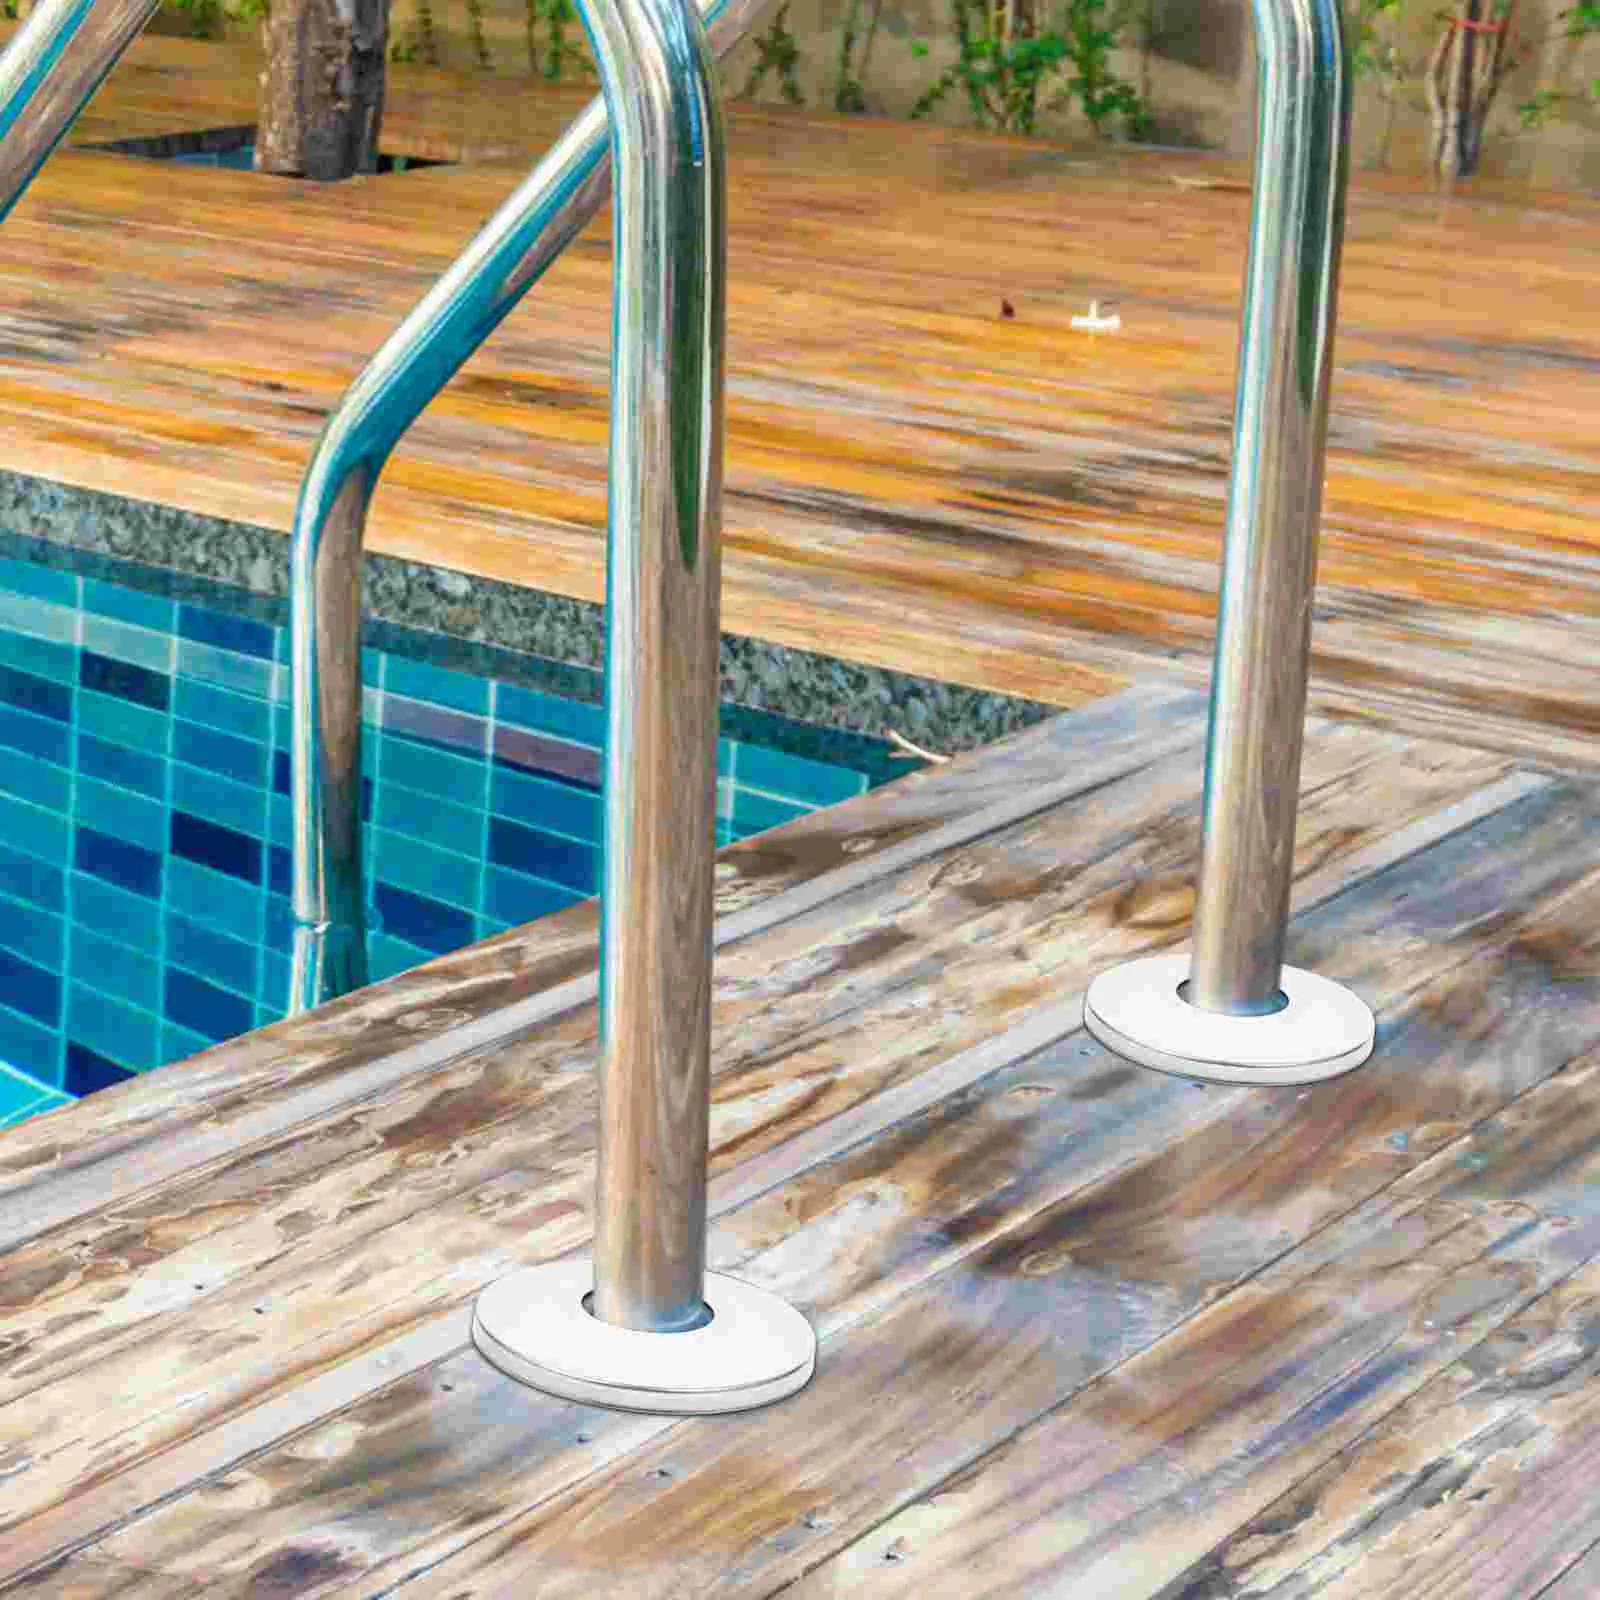 2 Pcs Escalator Decorative Cover Swimming Pool Ladder Spa Stainless Steel Escutcheon Plate Covers Handrail